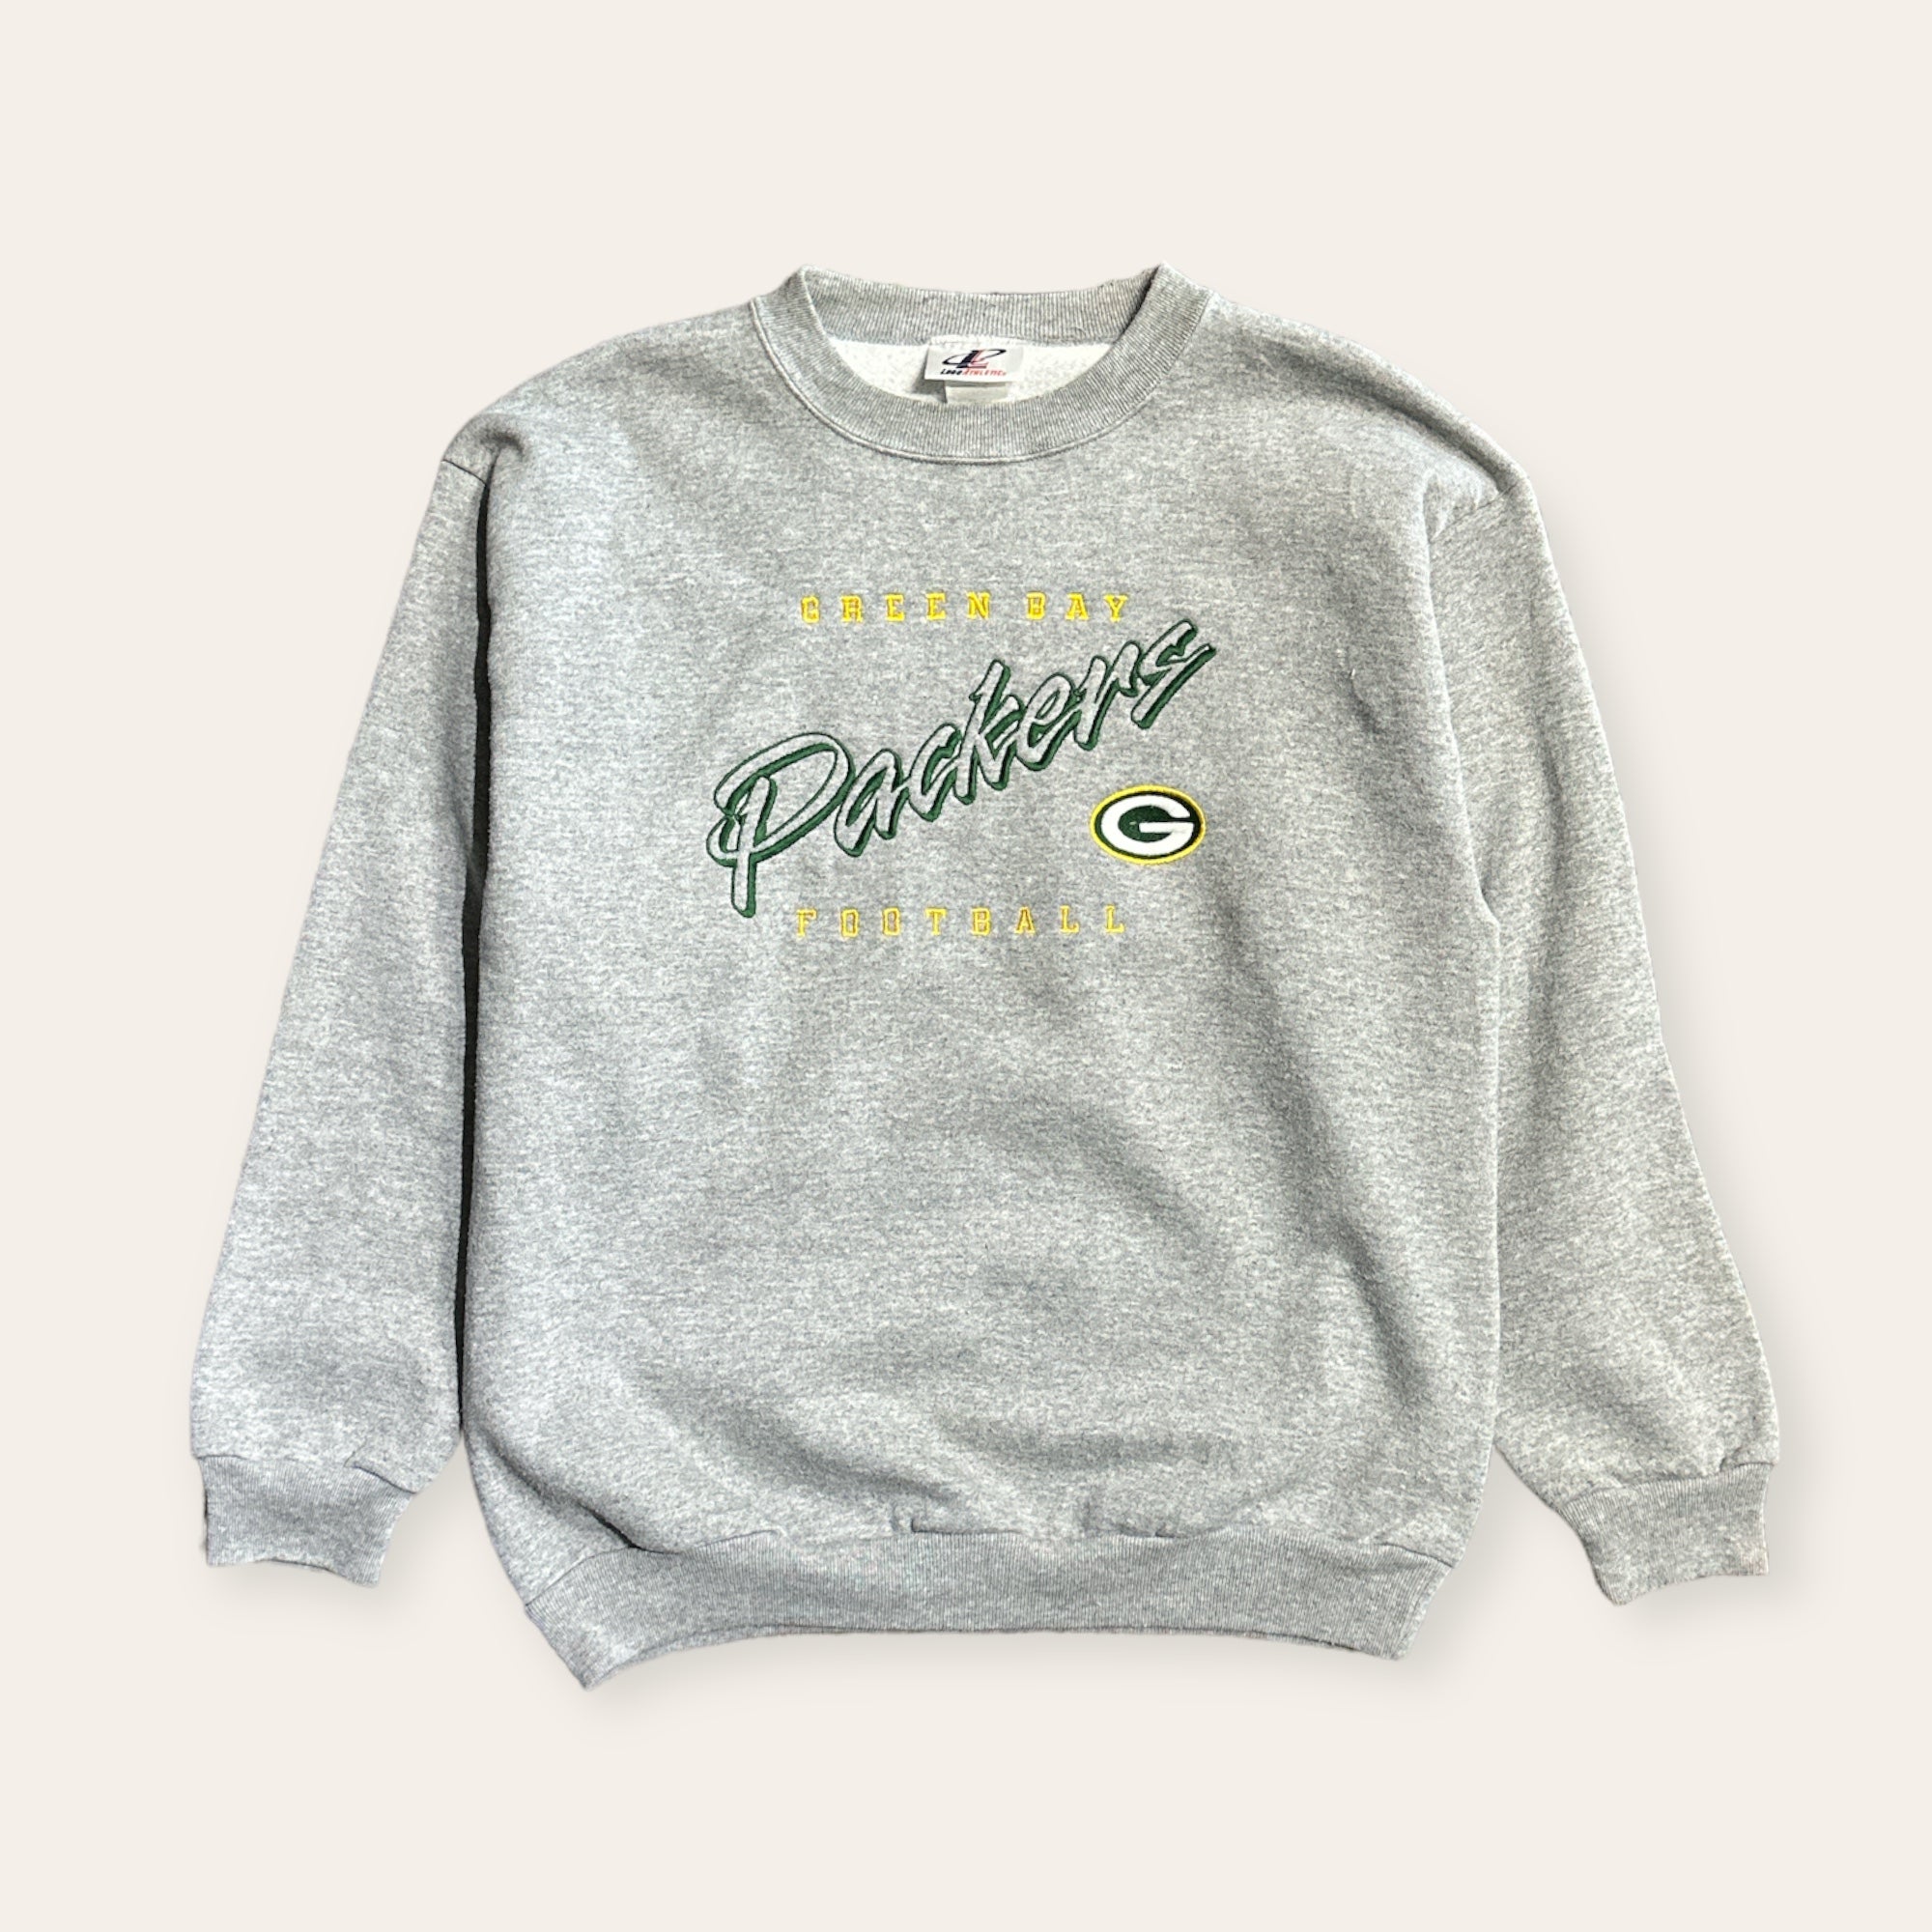 Vintage Green Bay Packers Sweater Size L